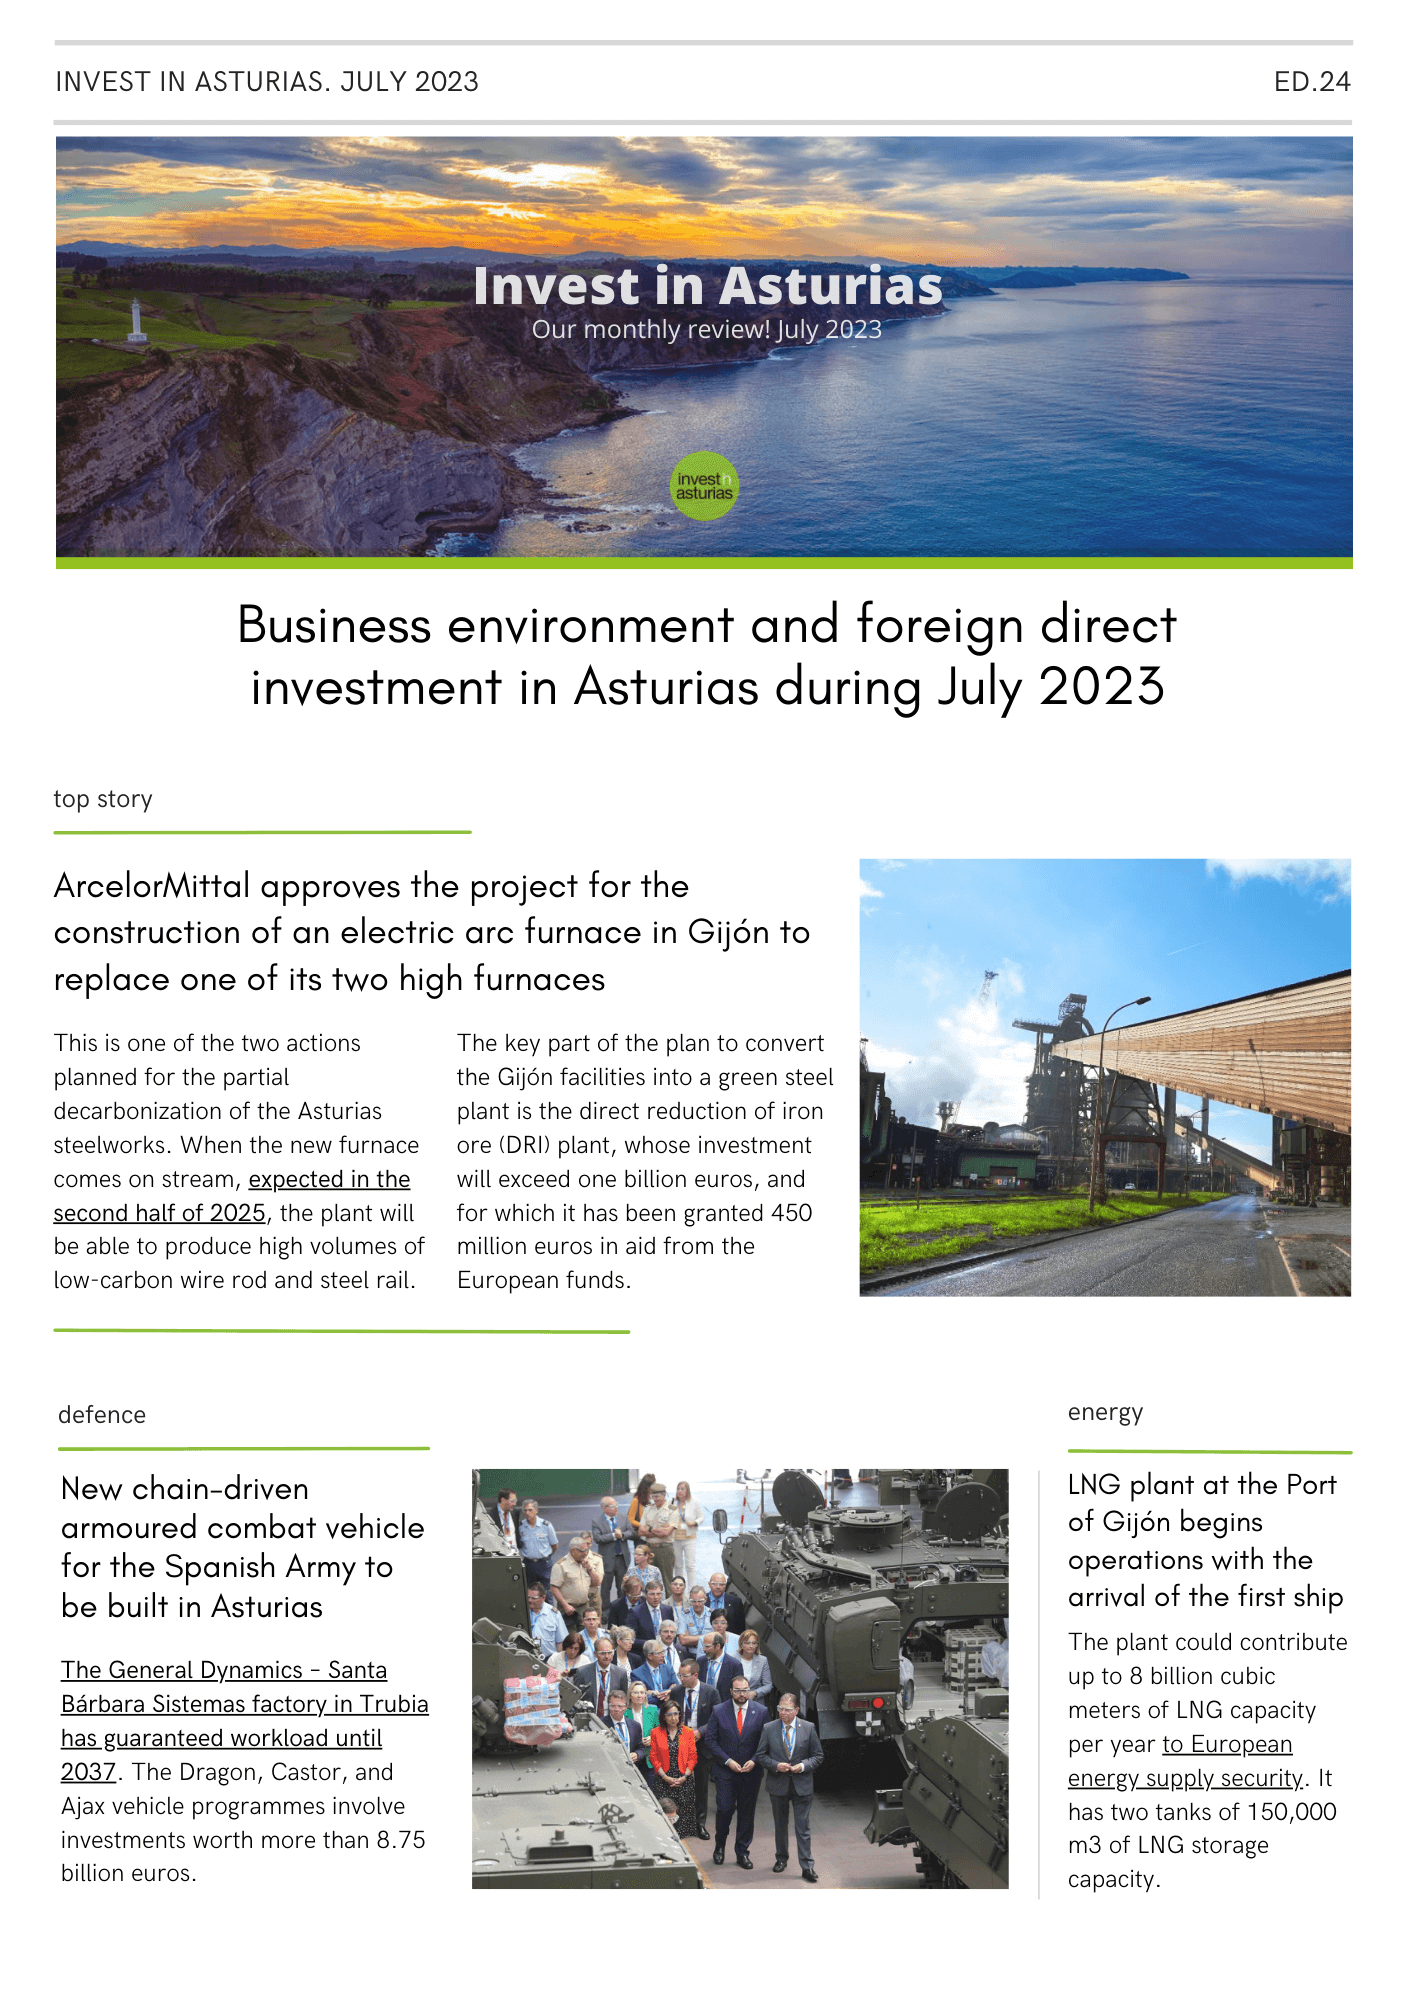 Newsletter Invest in Asturias july 2023 foreign investment